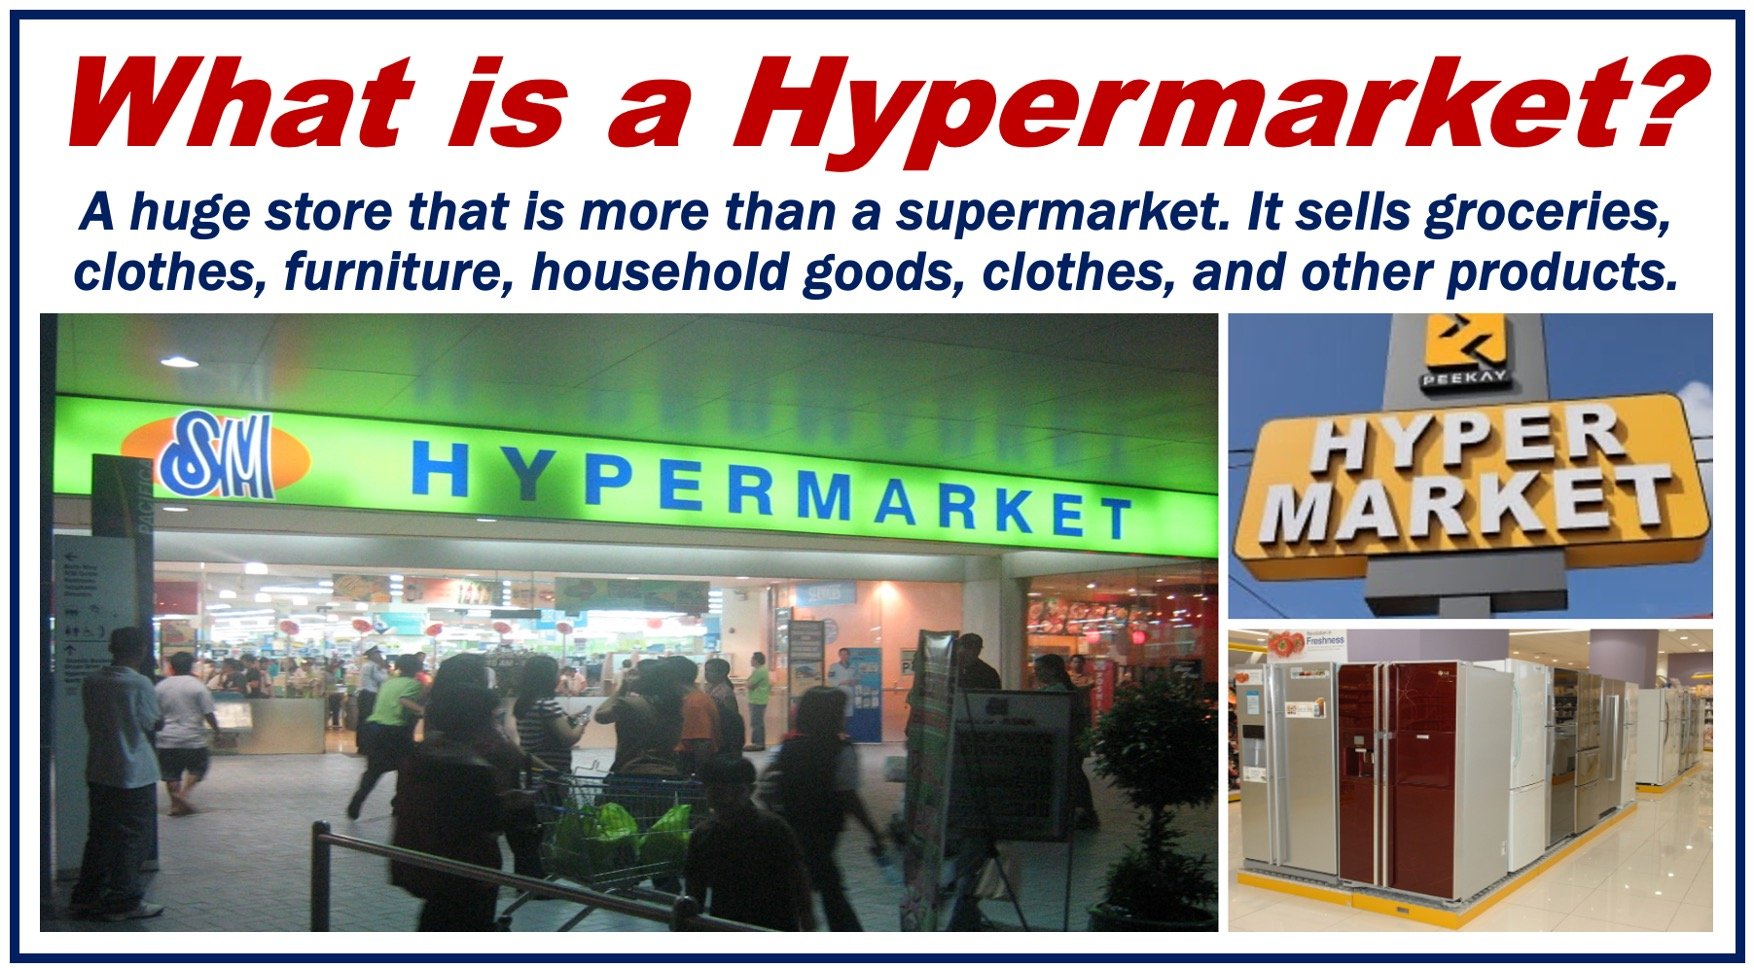 Three images of a hypermarket plus a written definition.